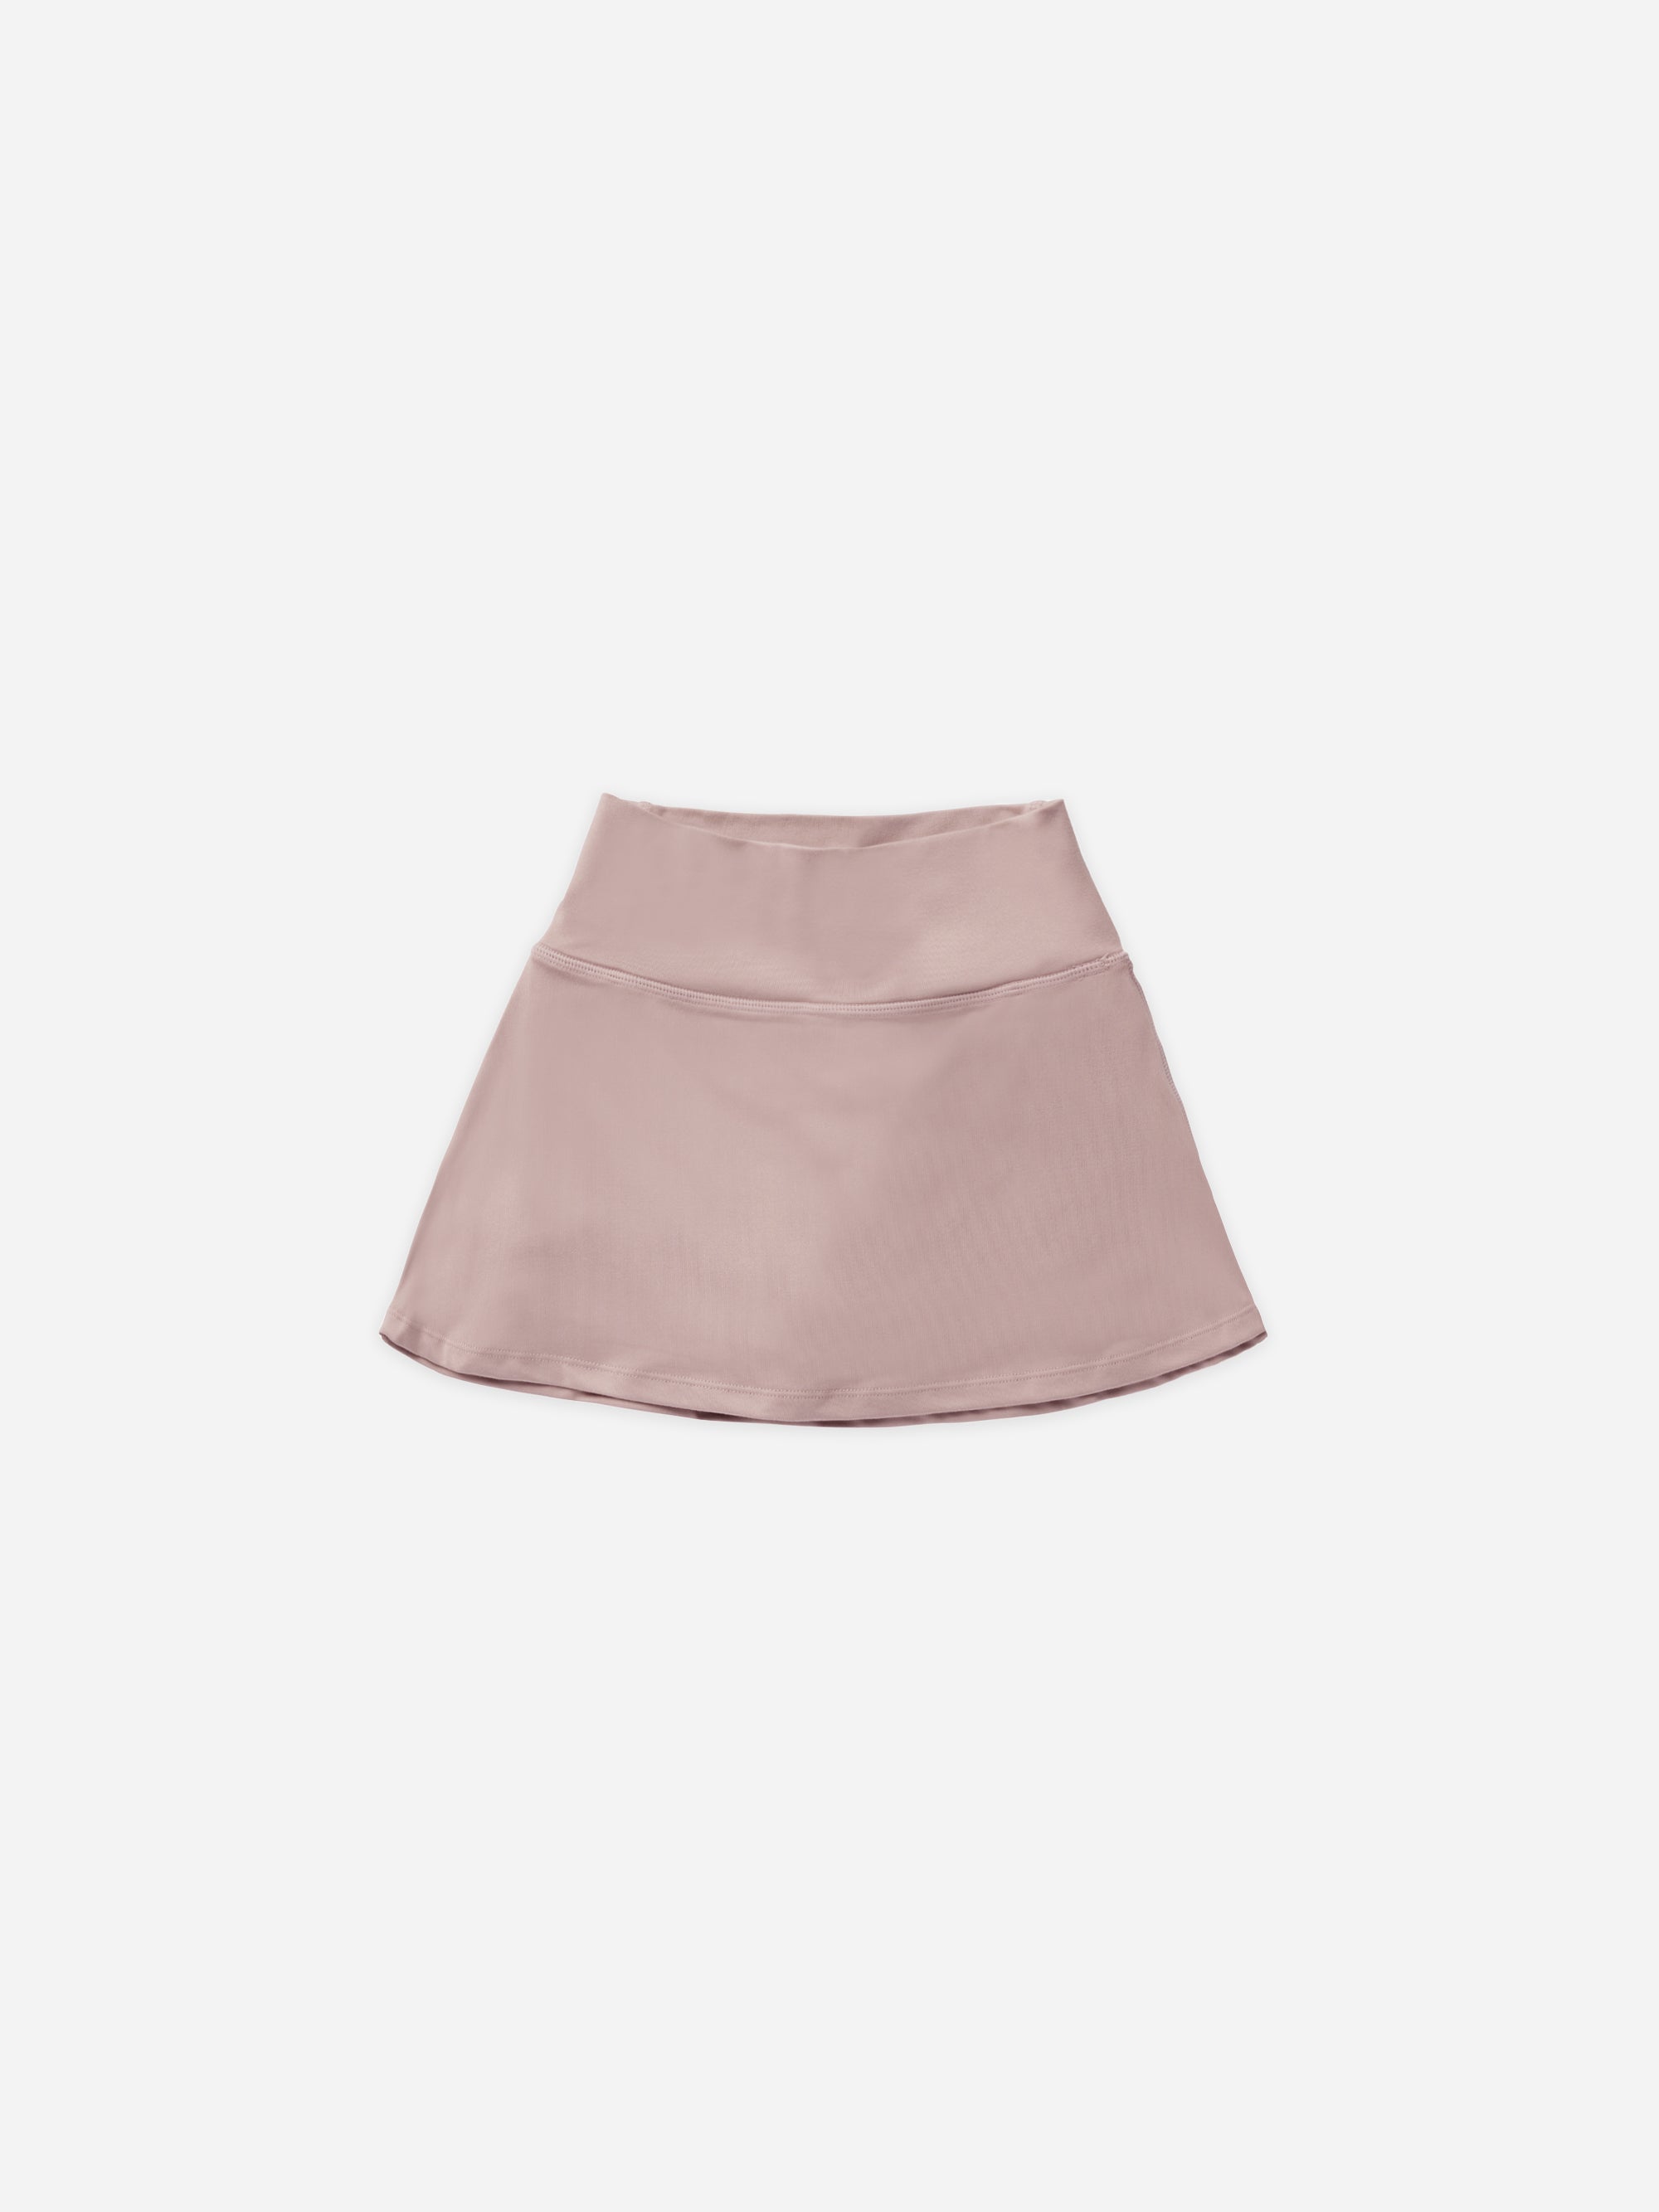 Bay Skirt || Mauve - Rylee + Cru | Kids Clothes | Trendy Baby Clothes | Modern Infant Outfits |